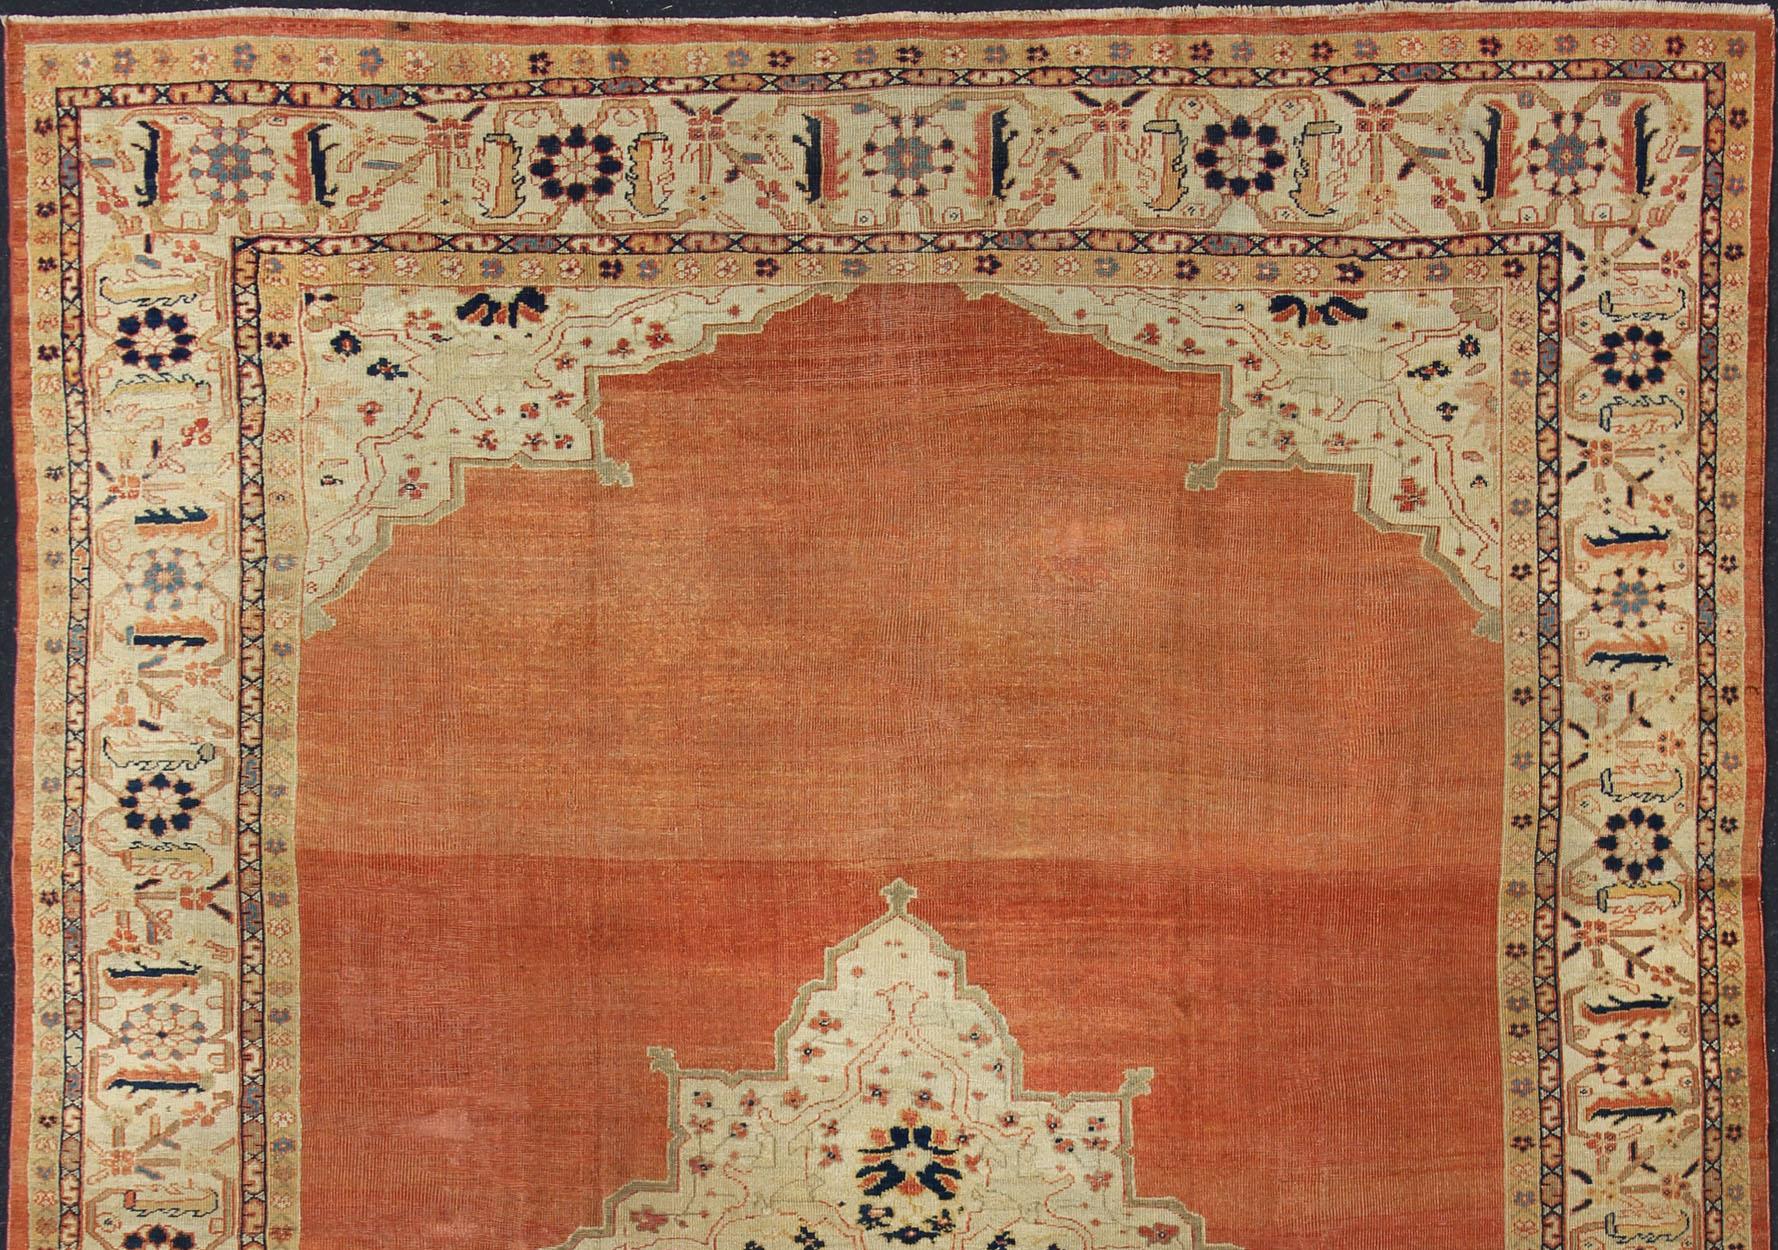 Hand-Knotted Antique Large Ziegler Sultanabad Rug in Soft Orange, Cream and Navy Blue For Sale